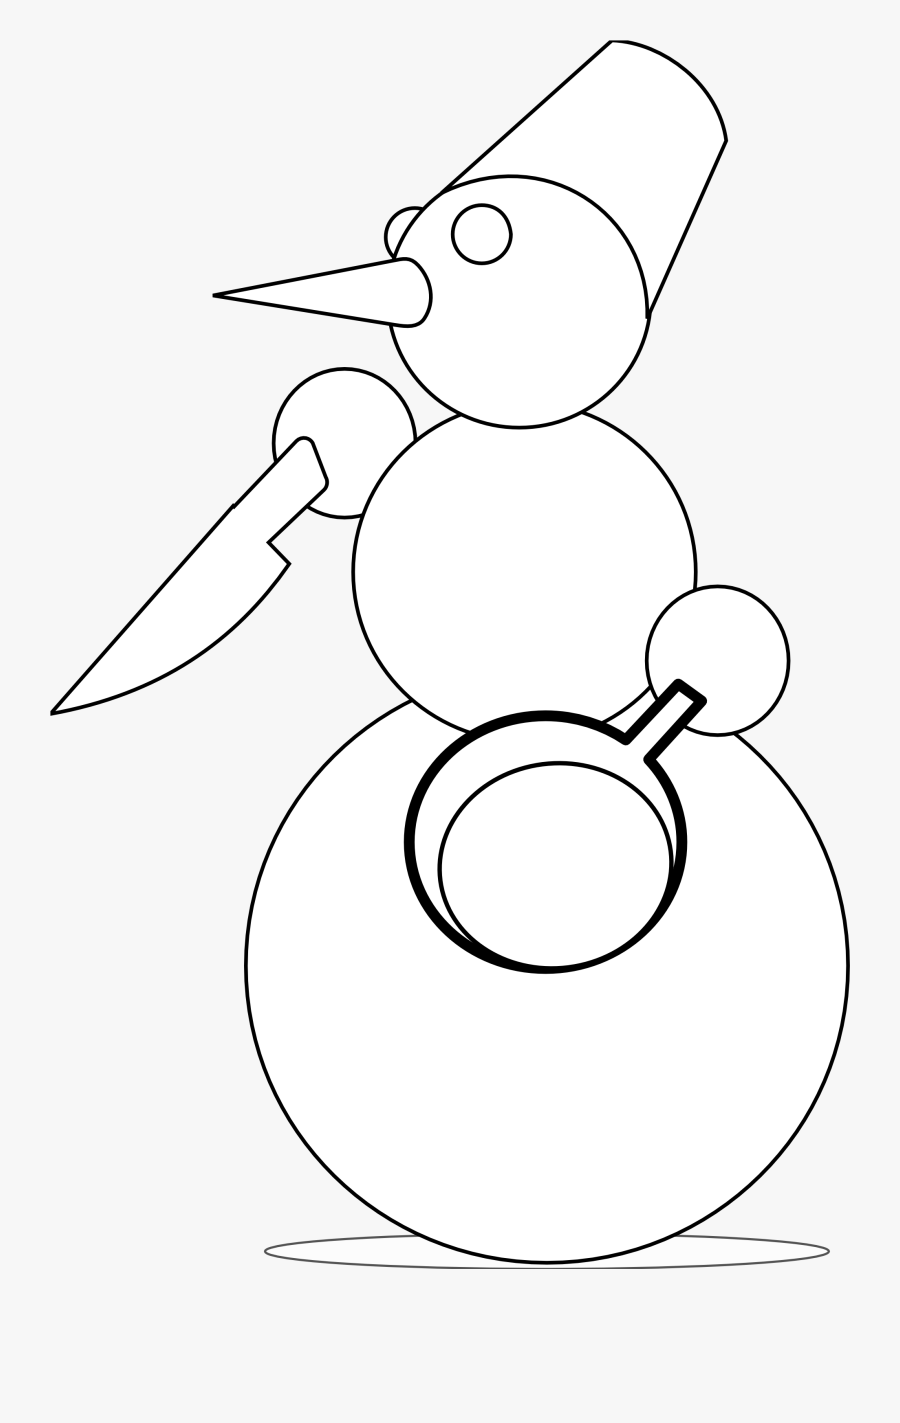 Snowman Cannibal By Rones Xmas Christmas Coloring Book - Cartoon, Transparent Clipart